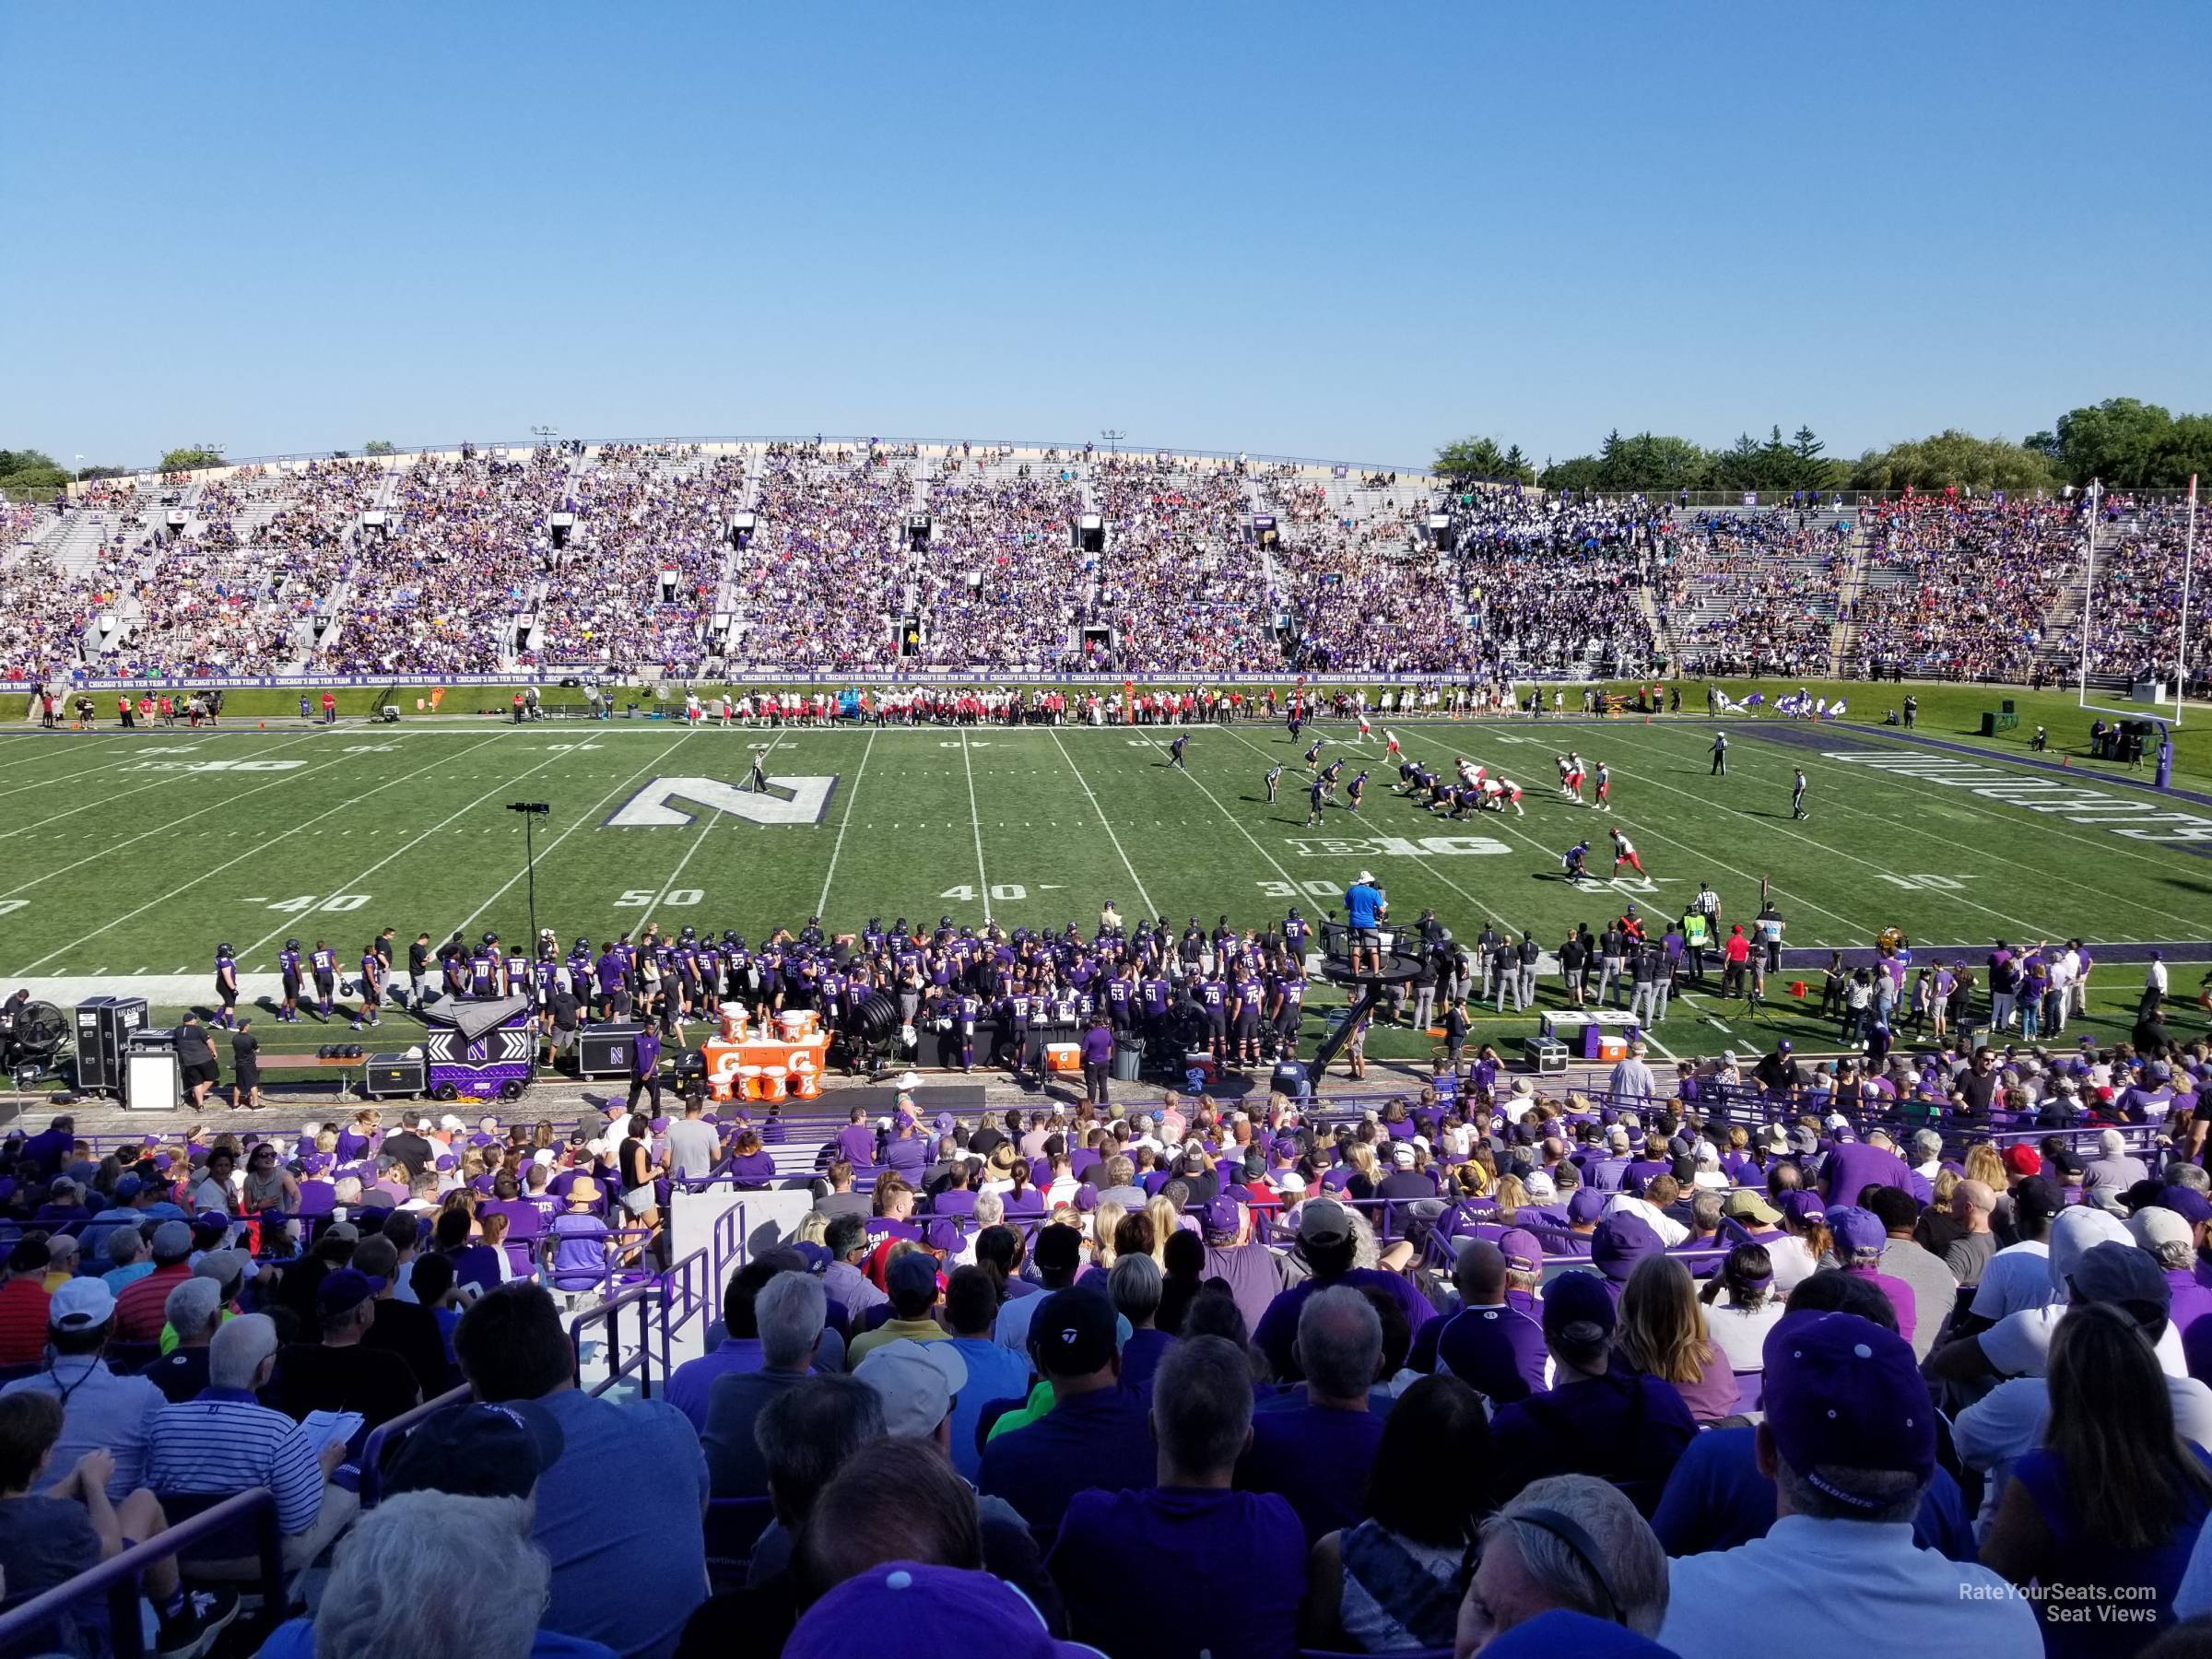 section 128, row 40 seat view  - ryan field